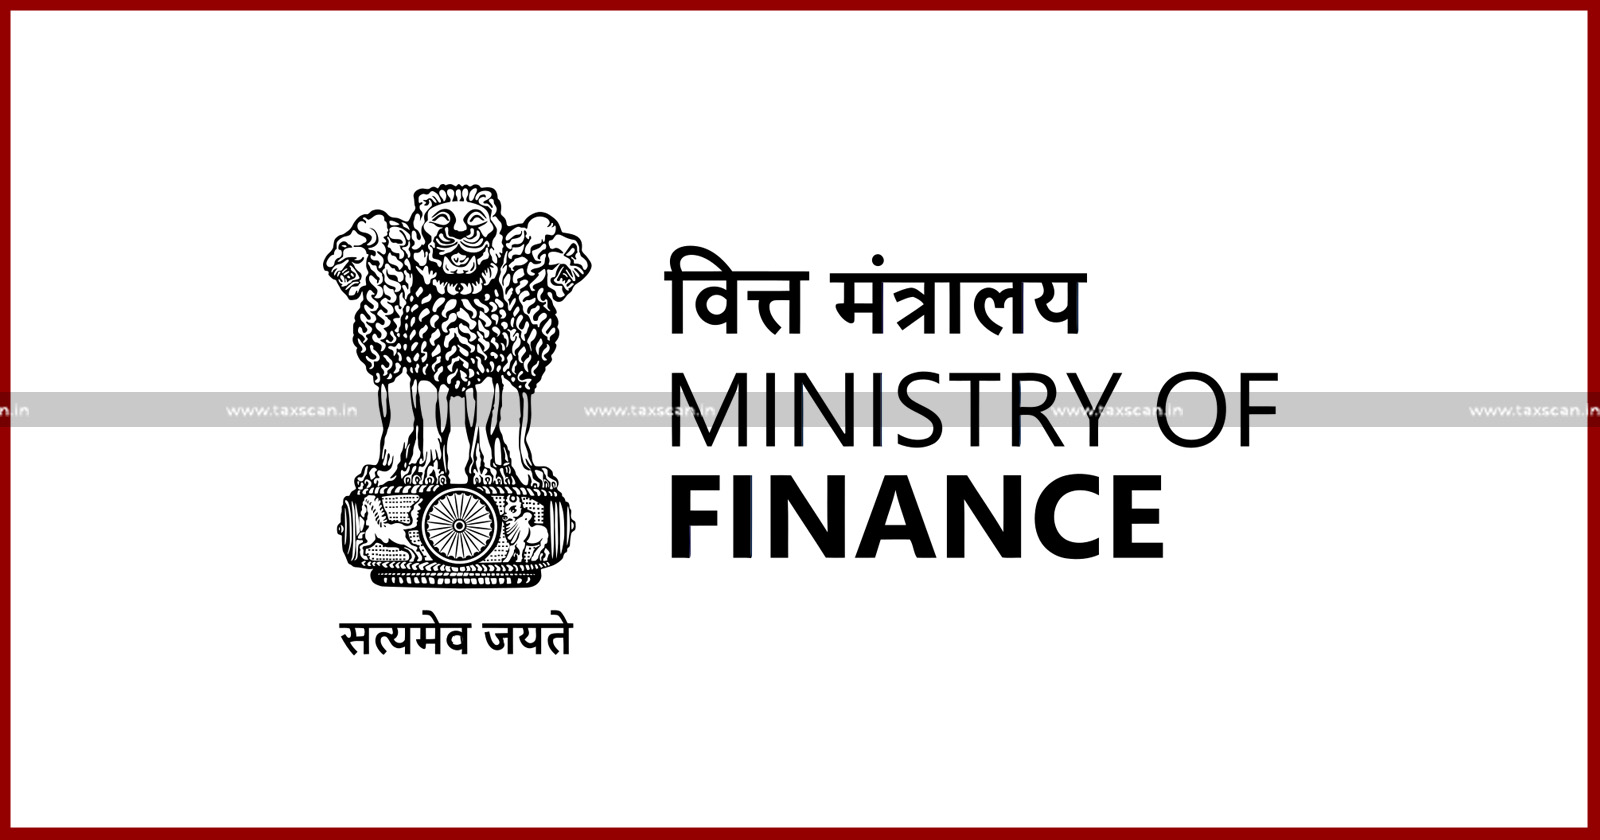 Finance Ministry launches a One-Time Settlement Scheme Vivad se Vishwas –One-Time Settlement Scheme -Vivad se Vishwas - Contractual Disputes - Contractual Disputes in Budget - taxscan